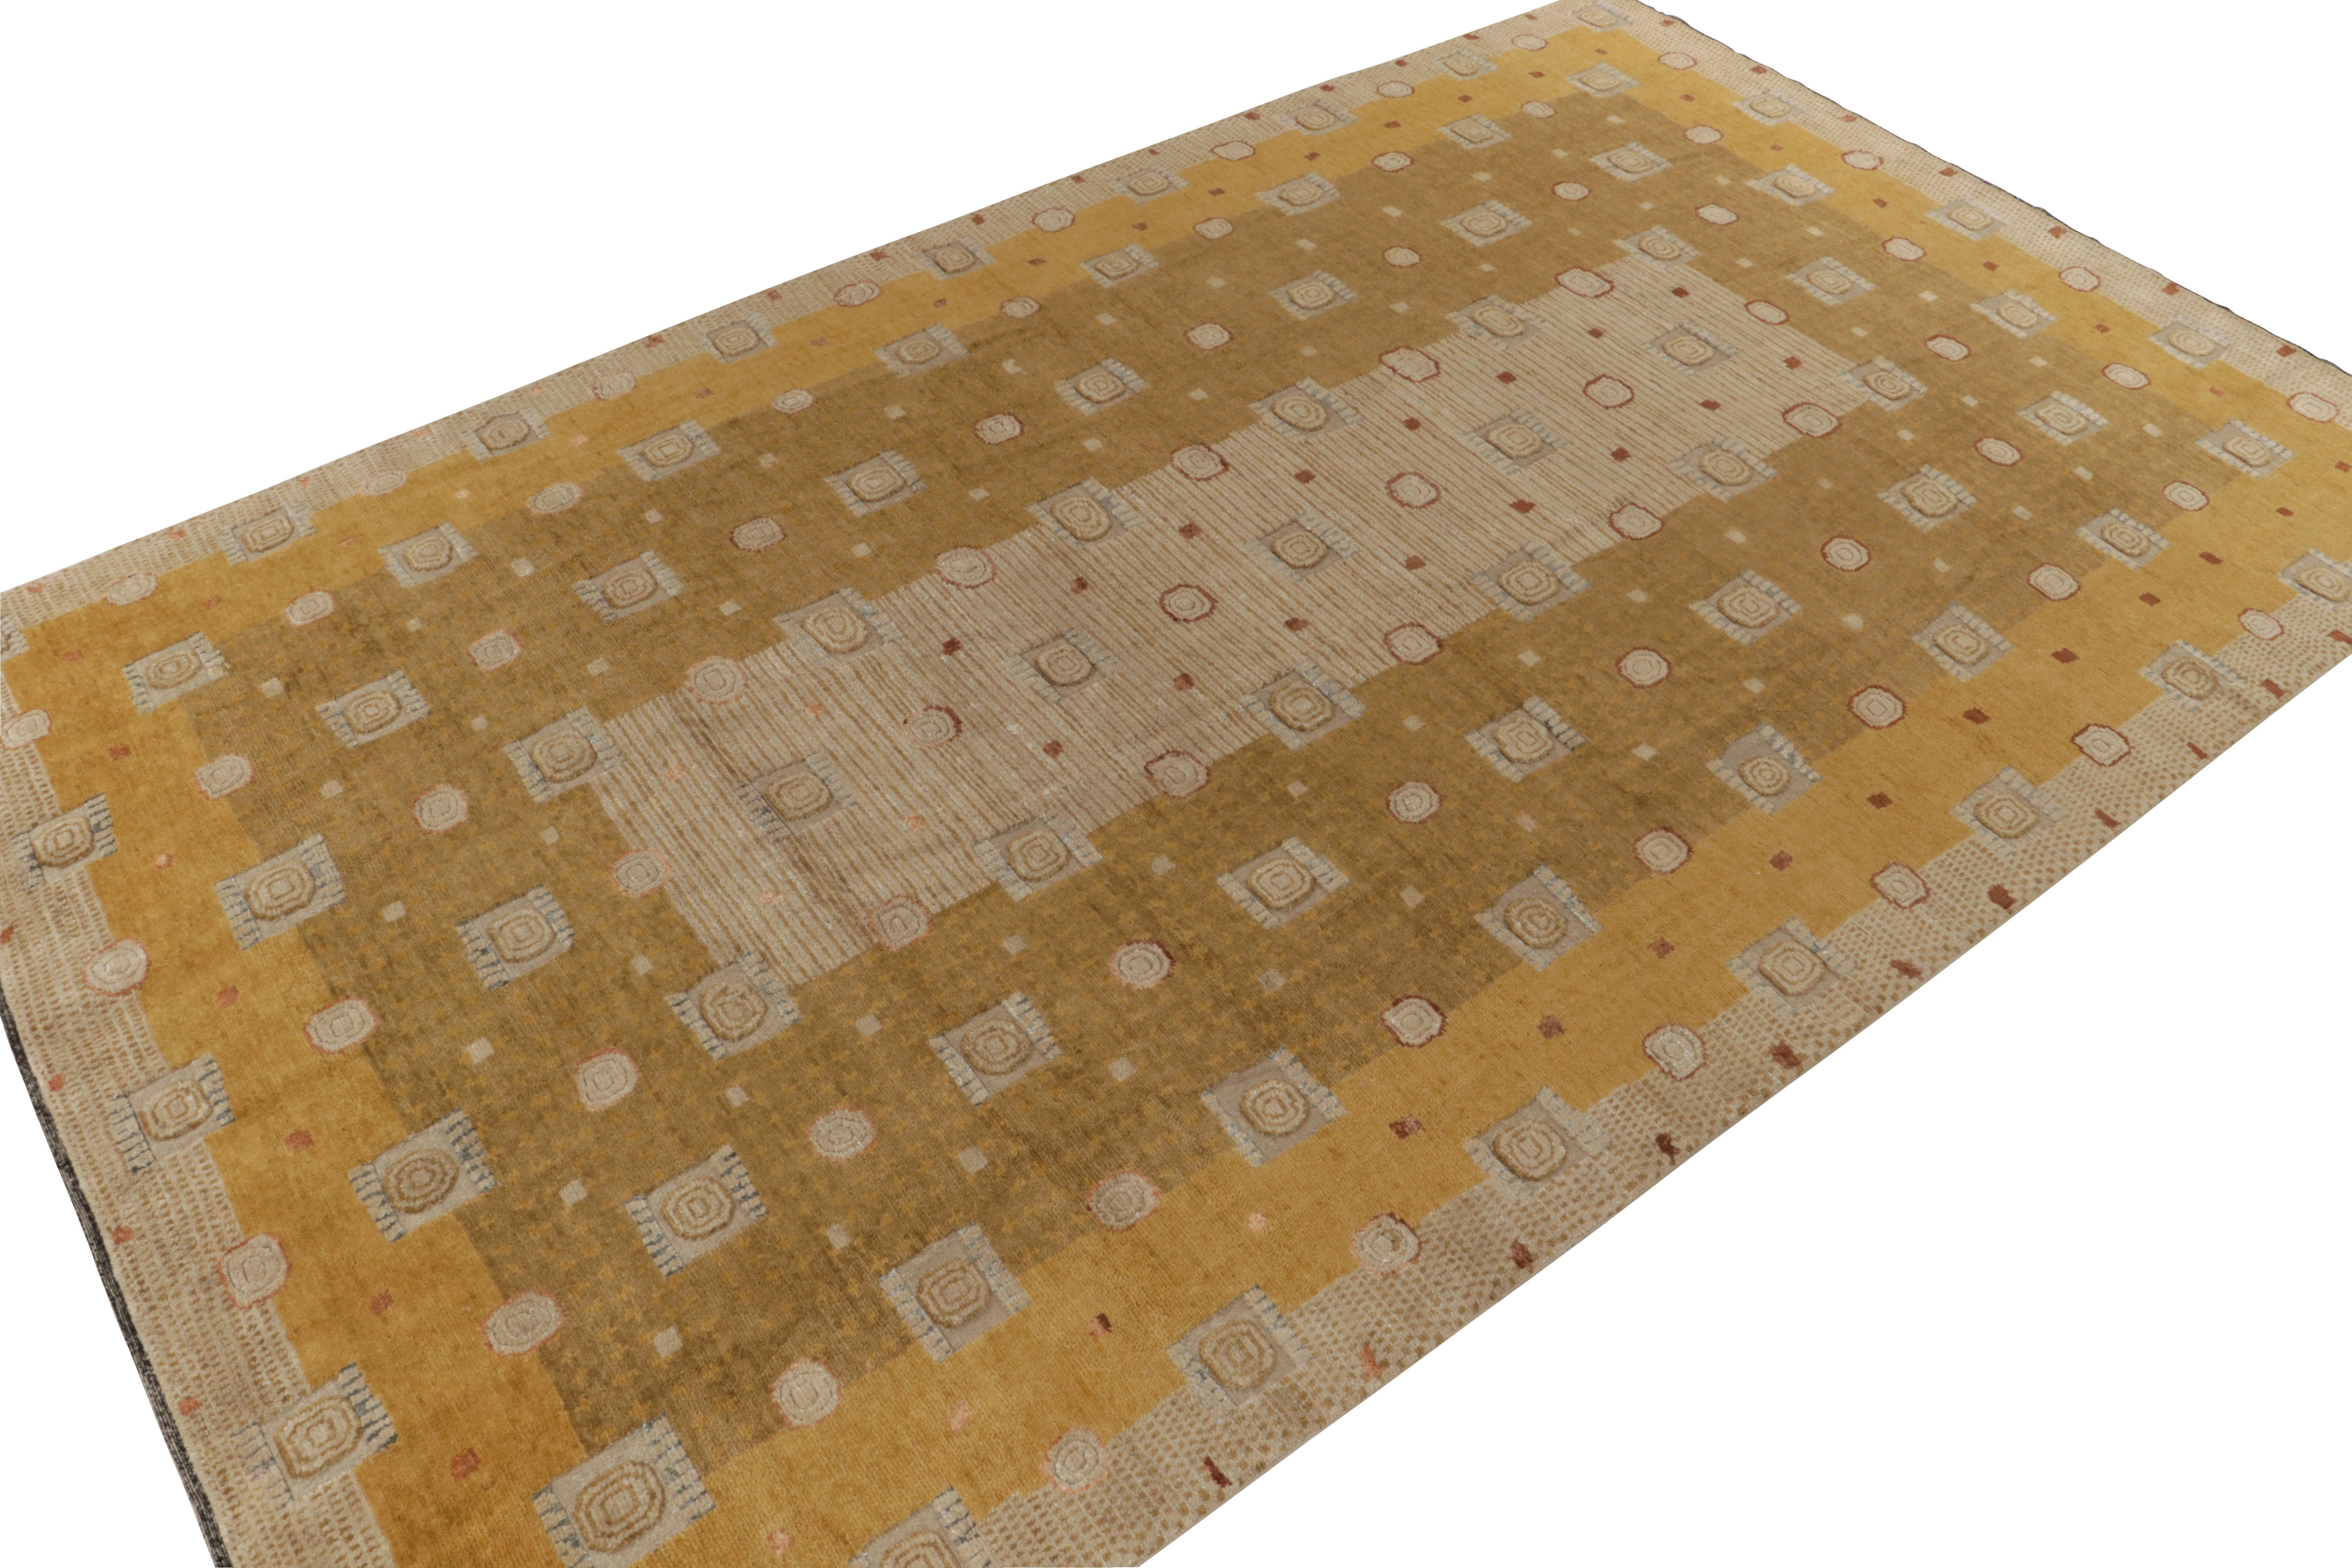 Indian Rug & Kilim’s Art Deco Style Rug in Gold and Beige-Brown Geometric Pattern For Sale